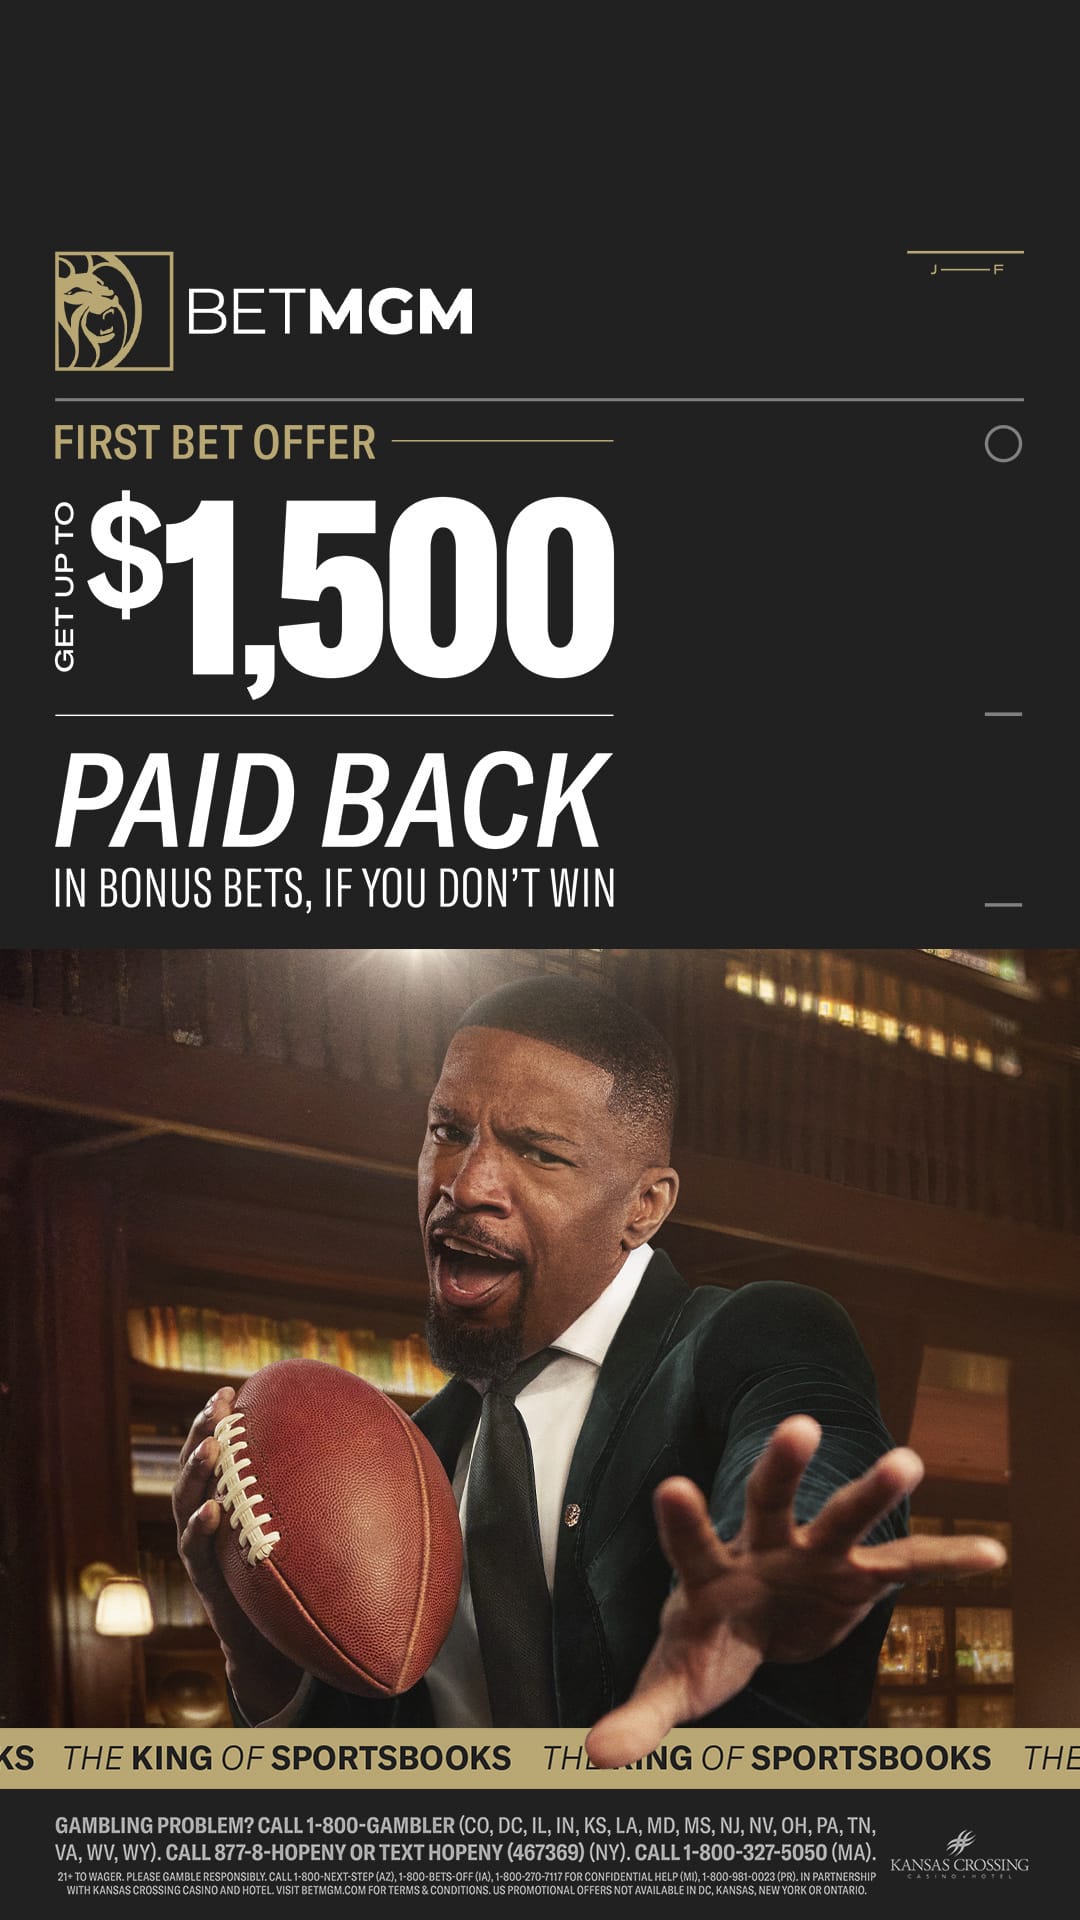 Link to the BetMGM's $1500 First Bet Offer.